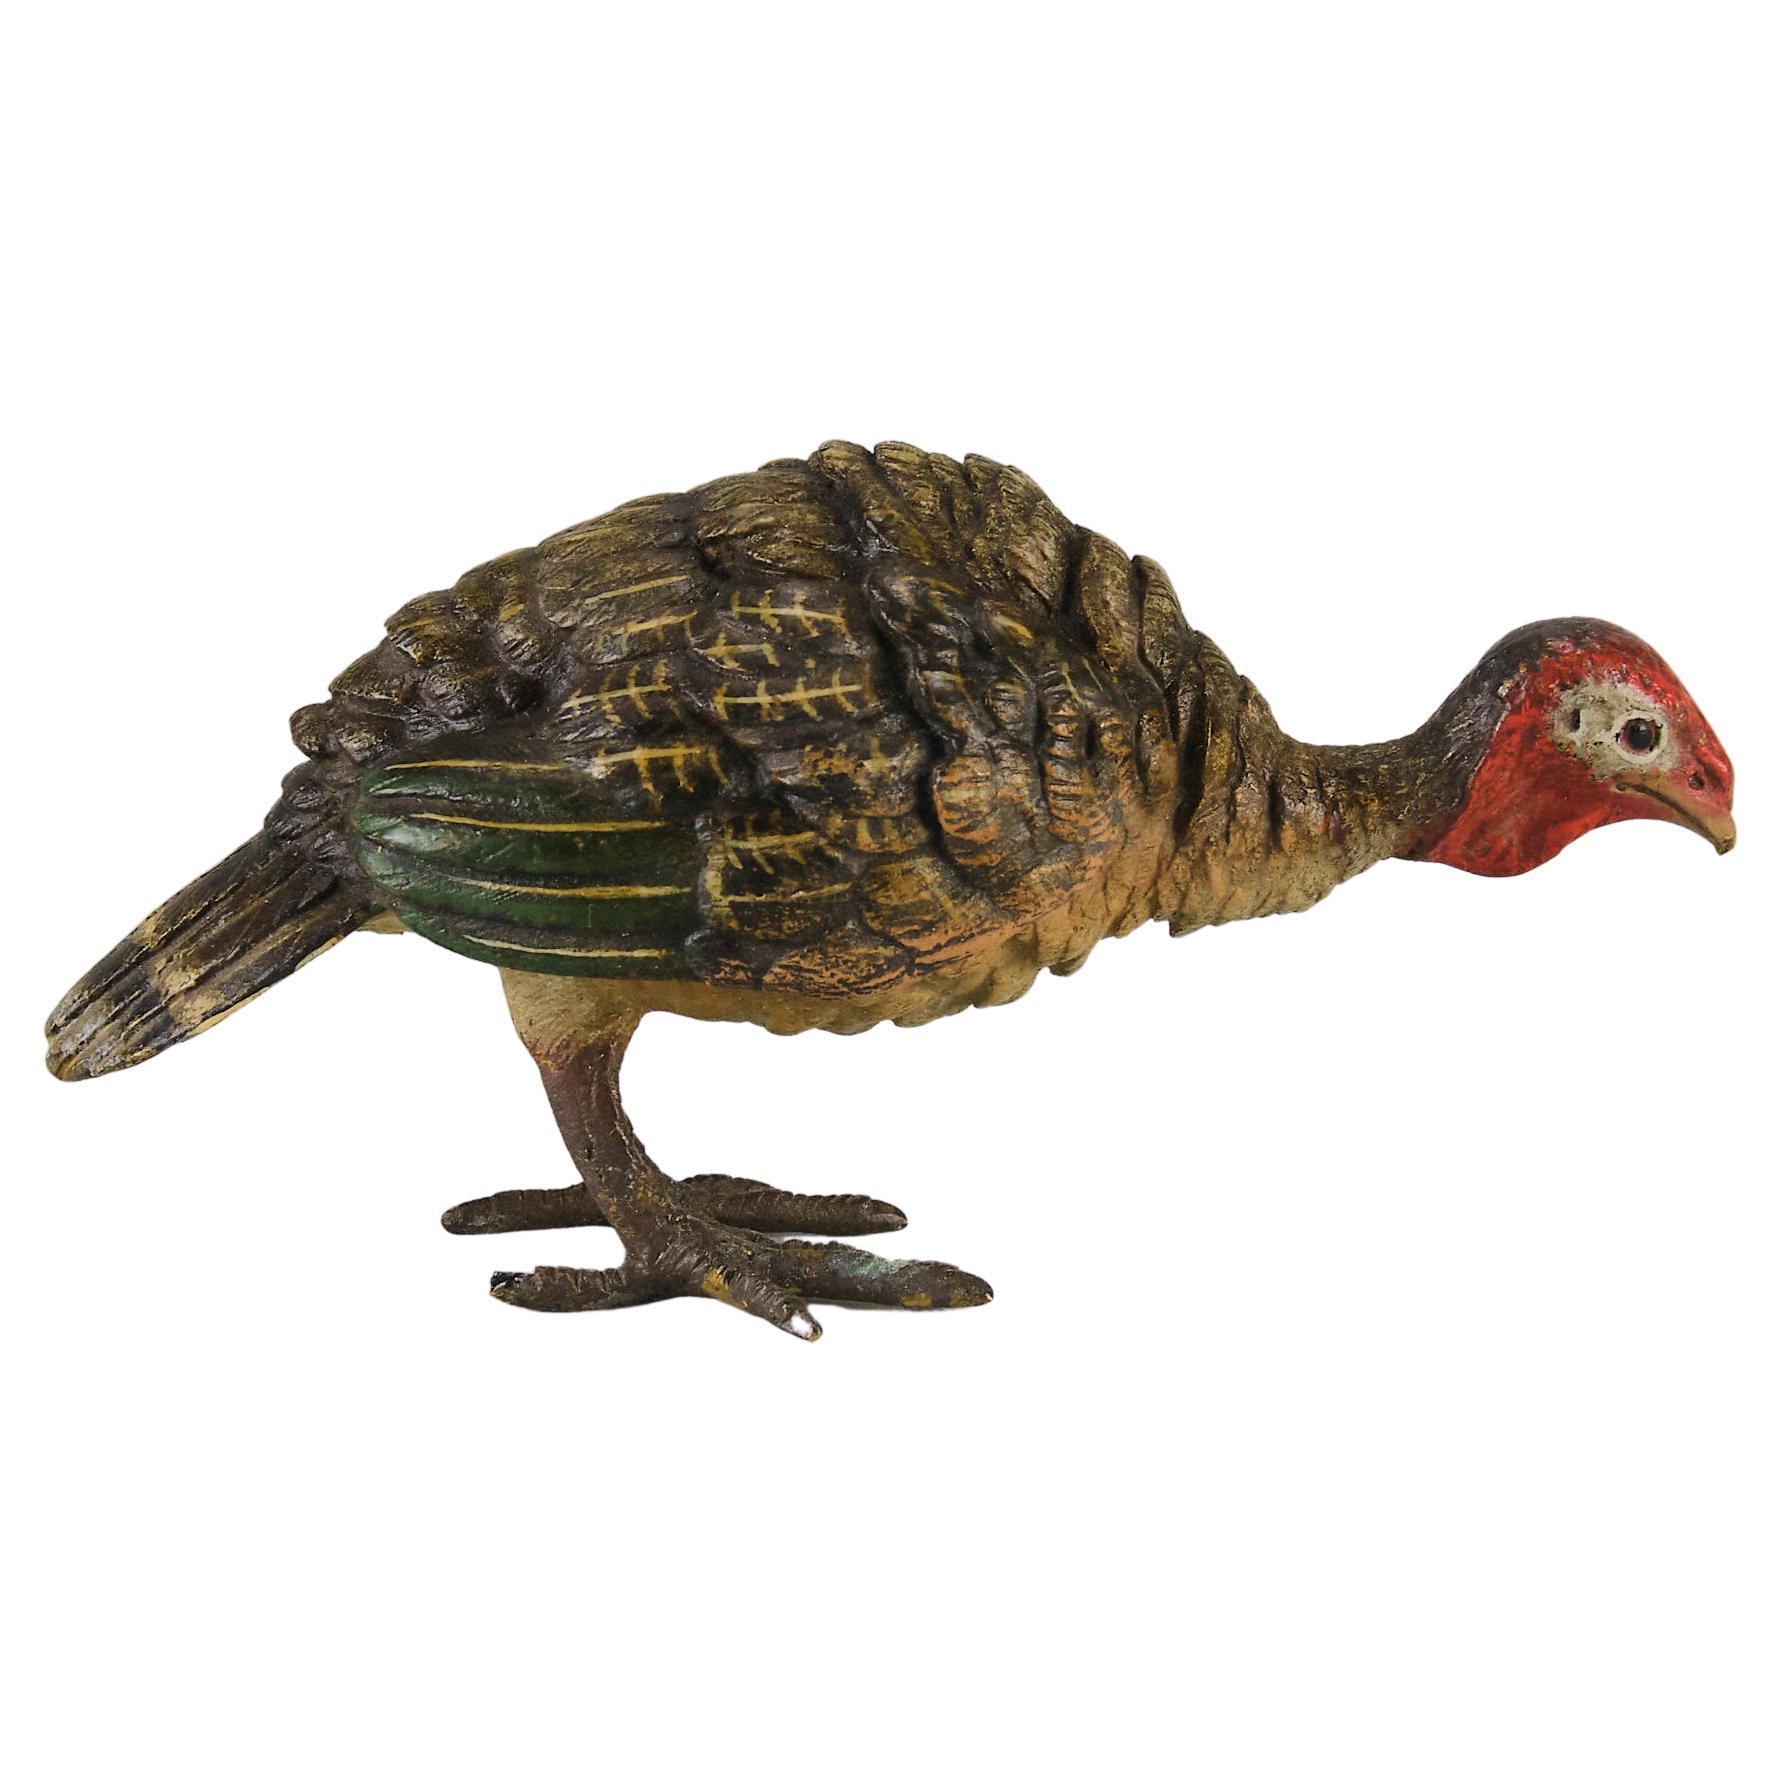 Early 20th Century Cold-Painted Bronze Entitled "Feeding Turkey" by Bergman